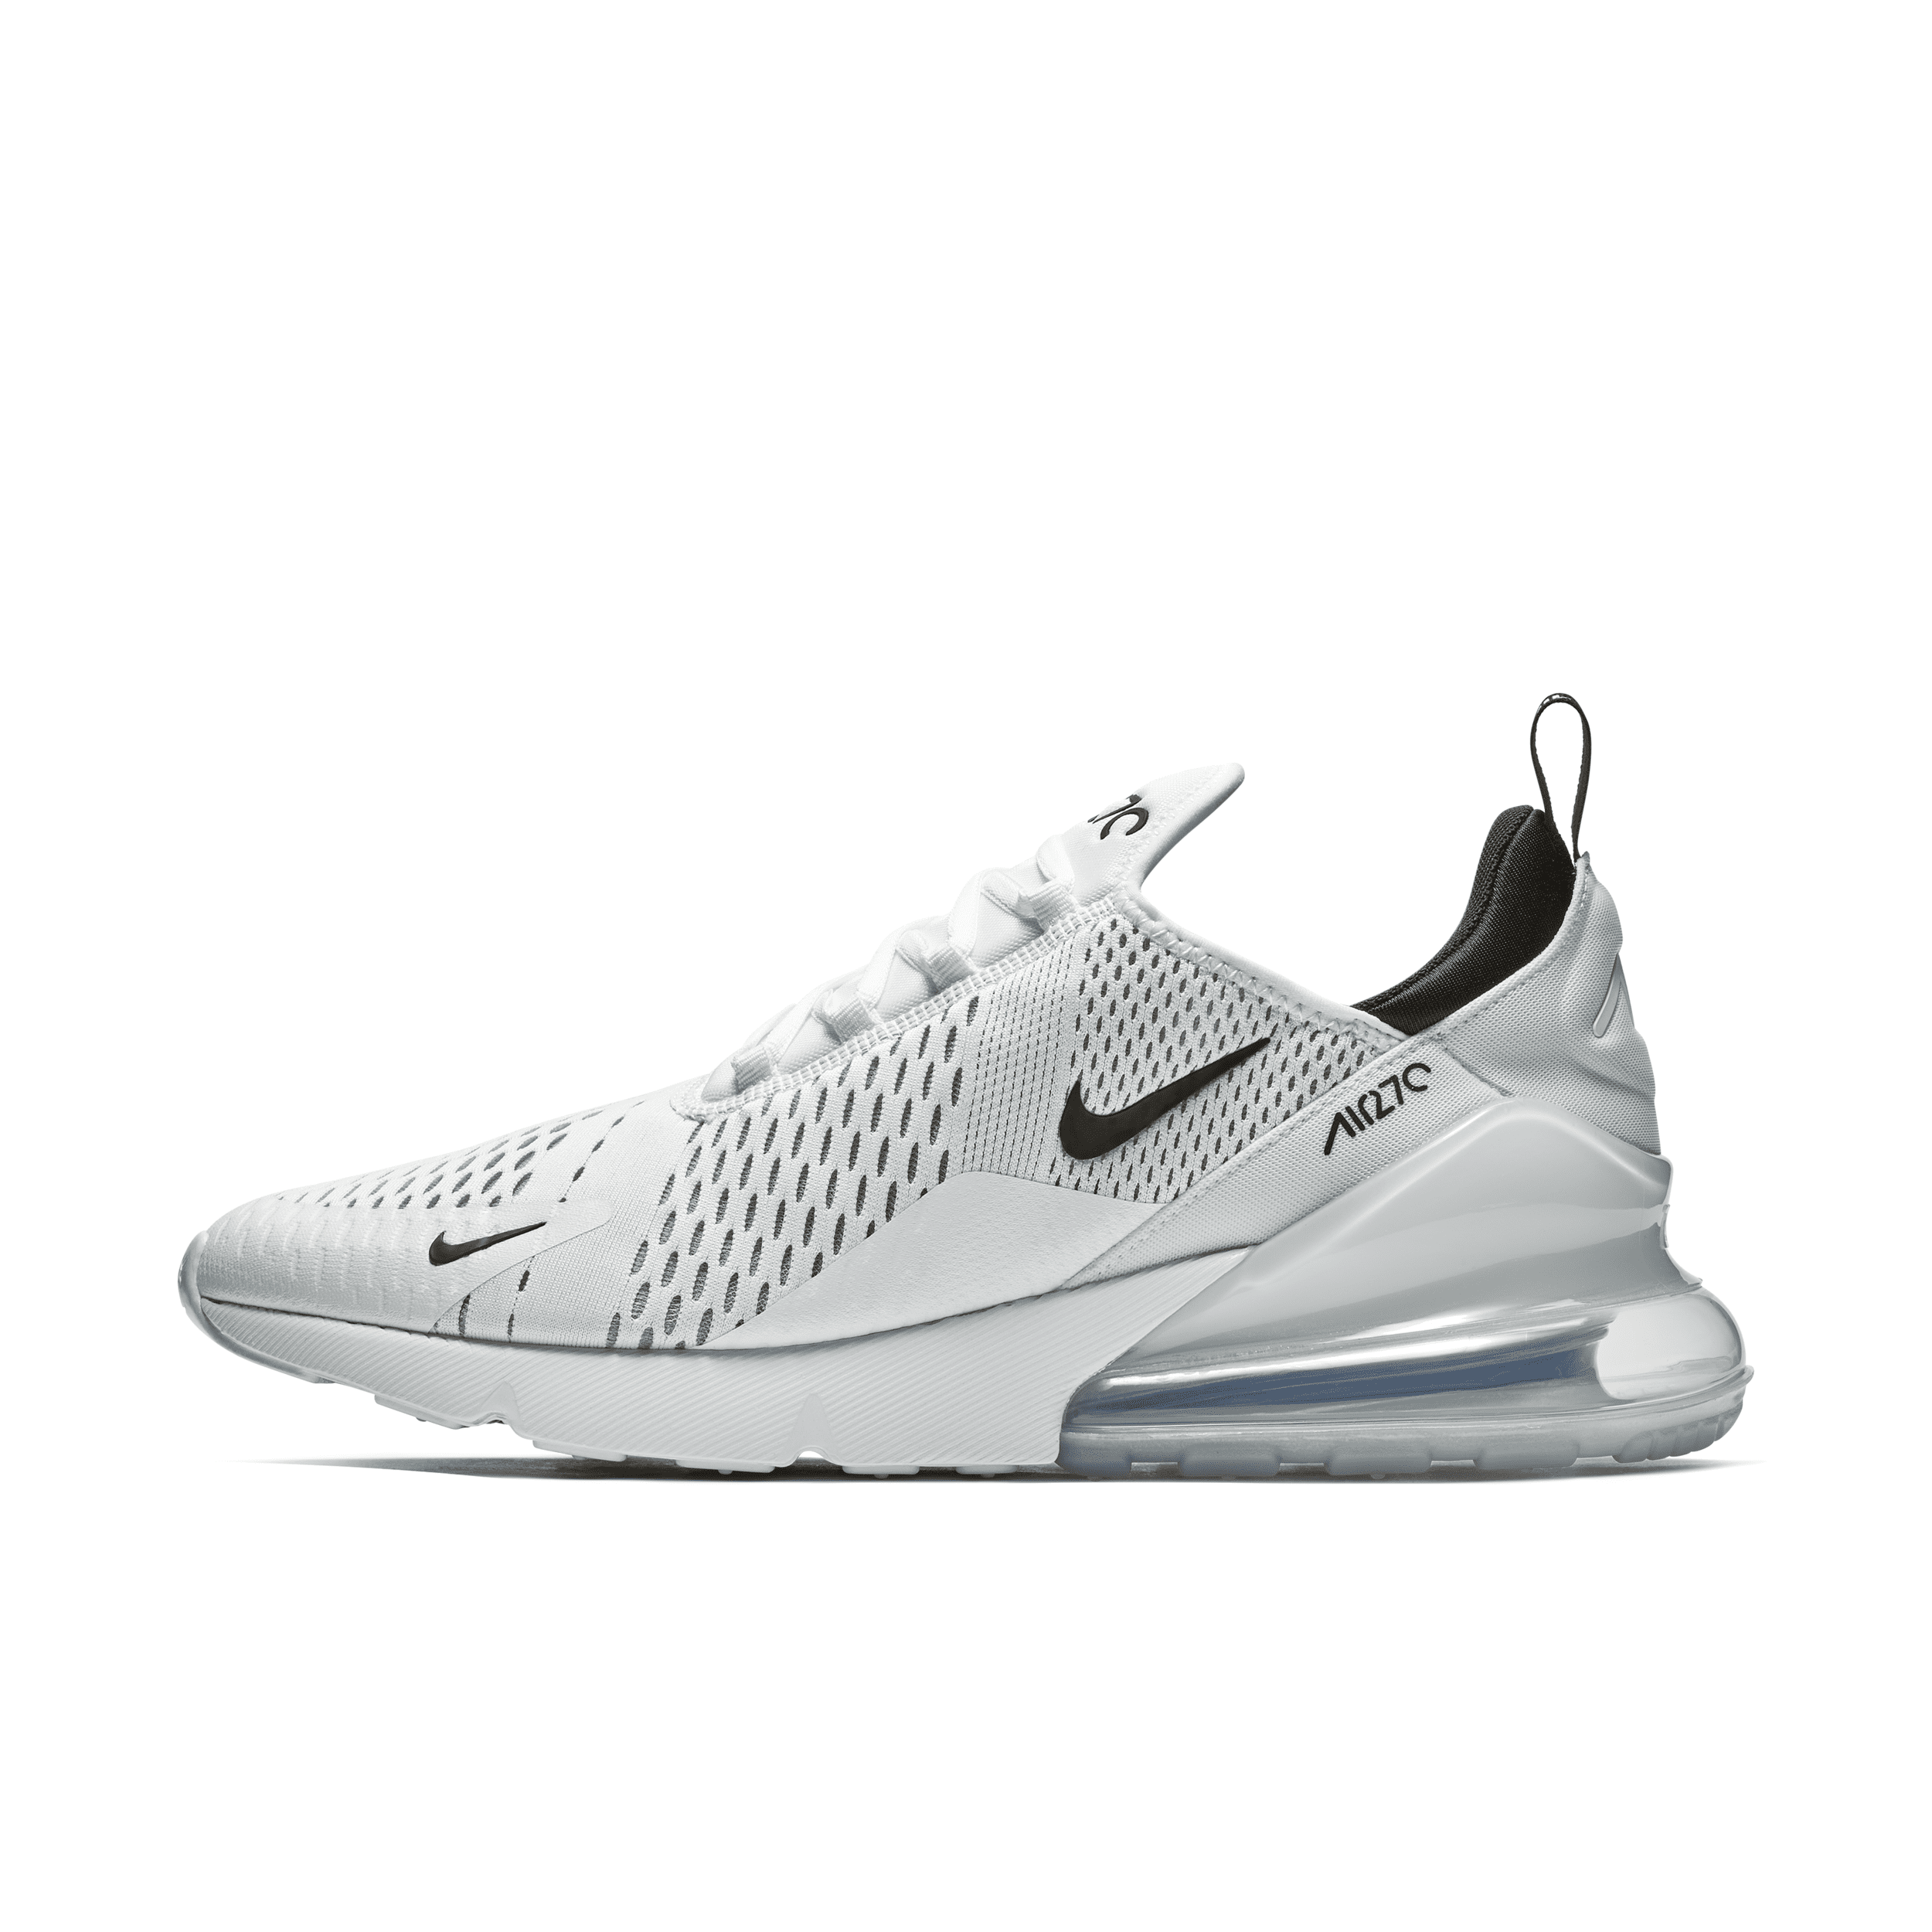 Nike Men's Air Max 270 Shoes in White, Size: 10.5 | AH8050-100